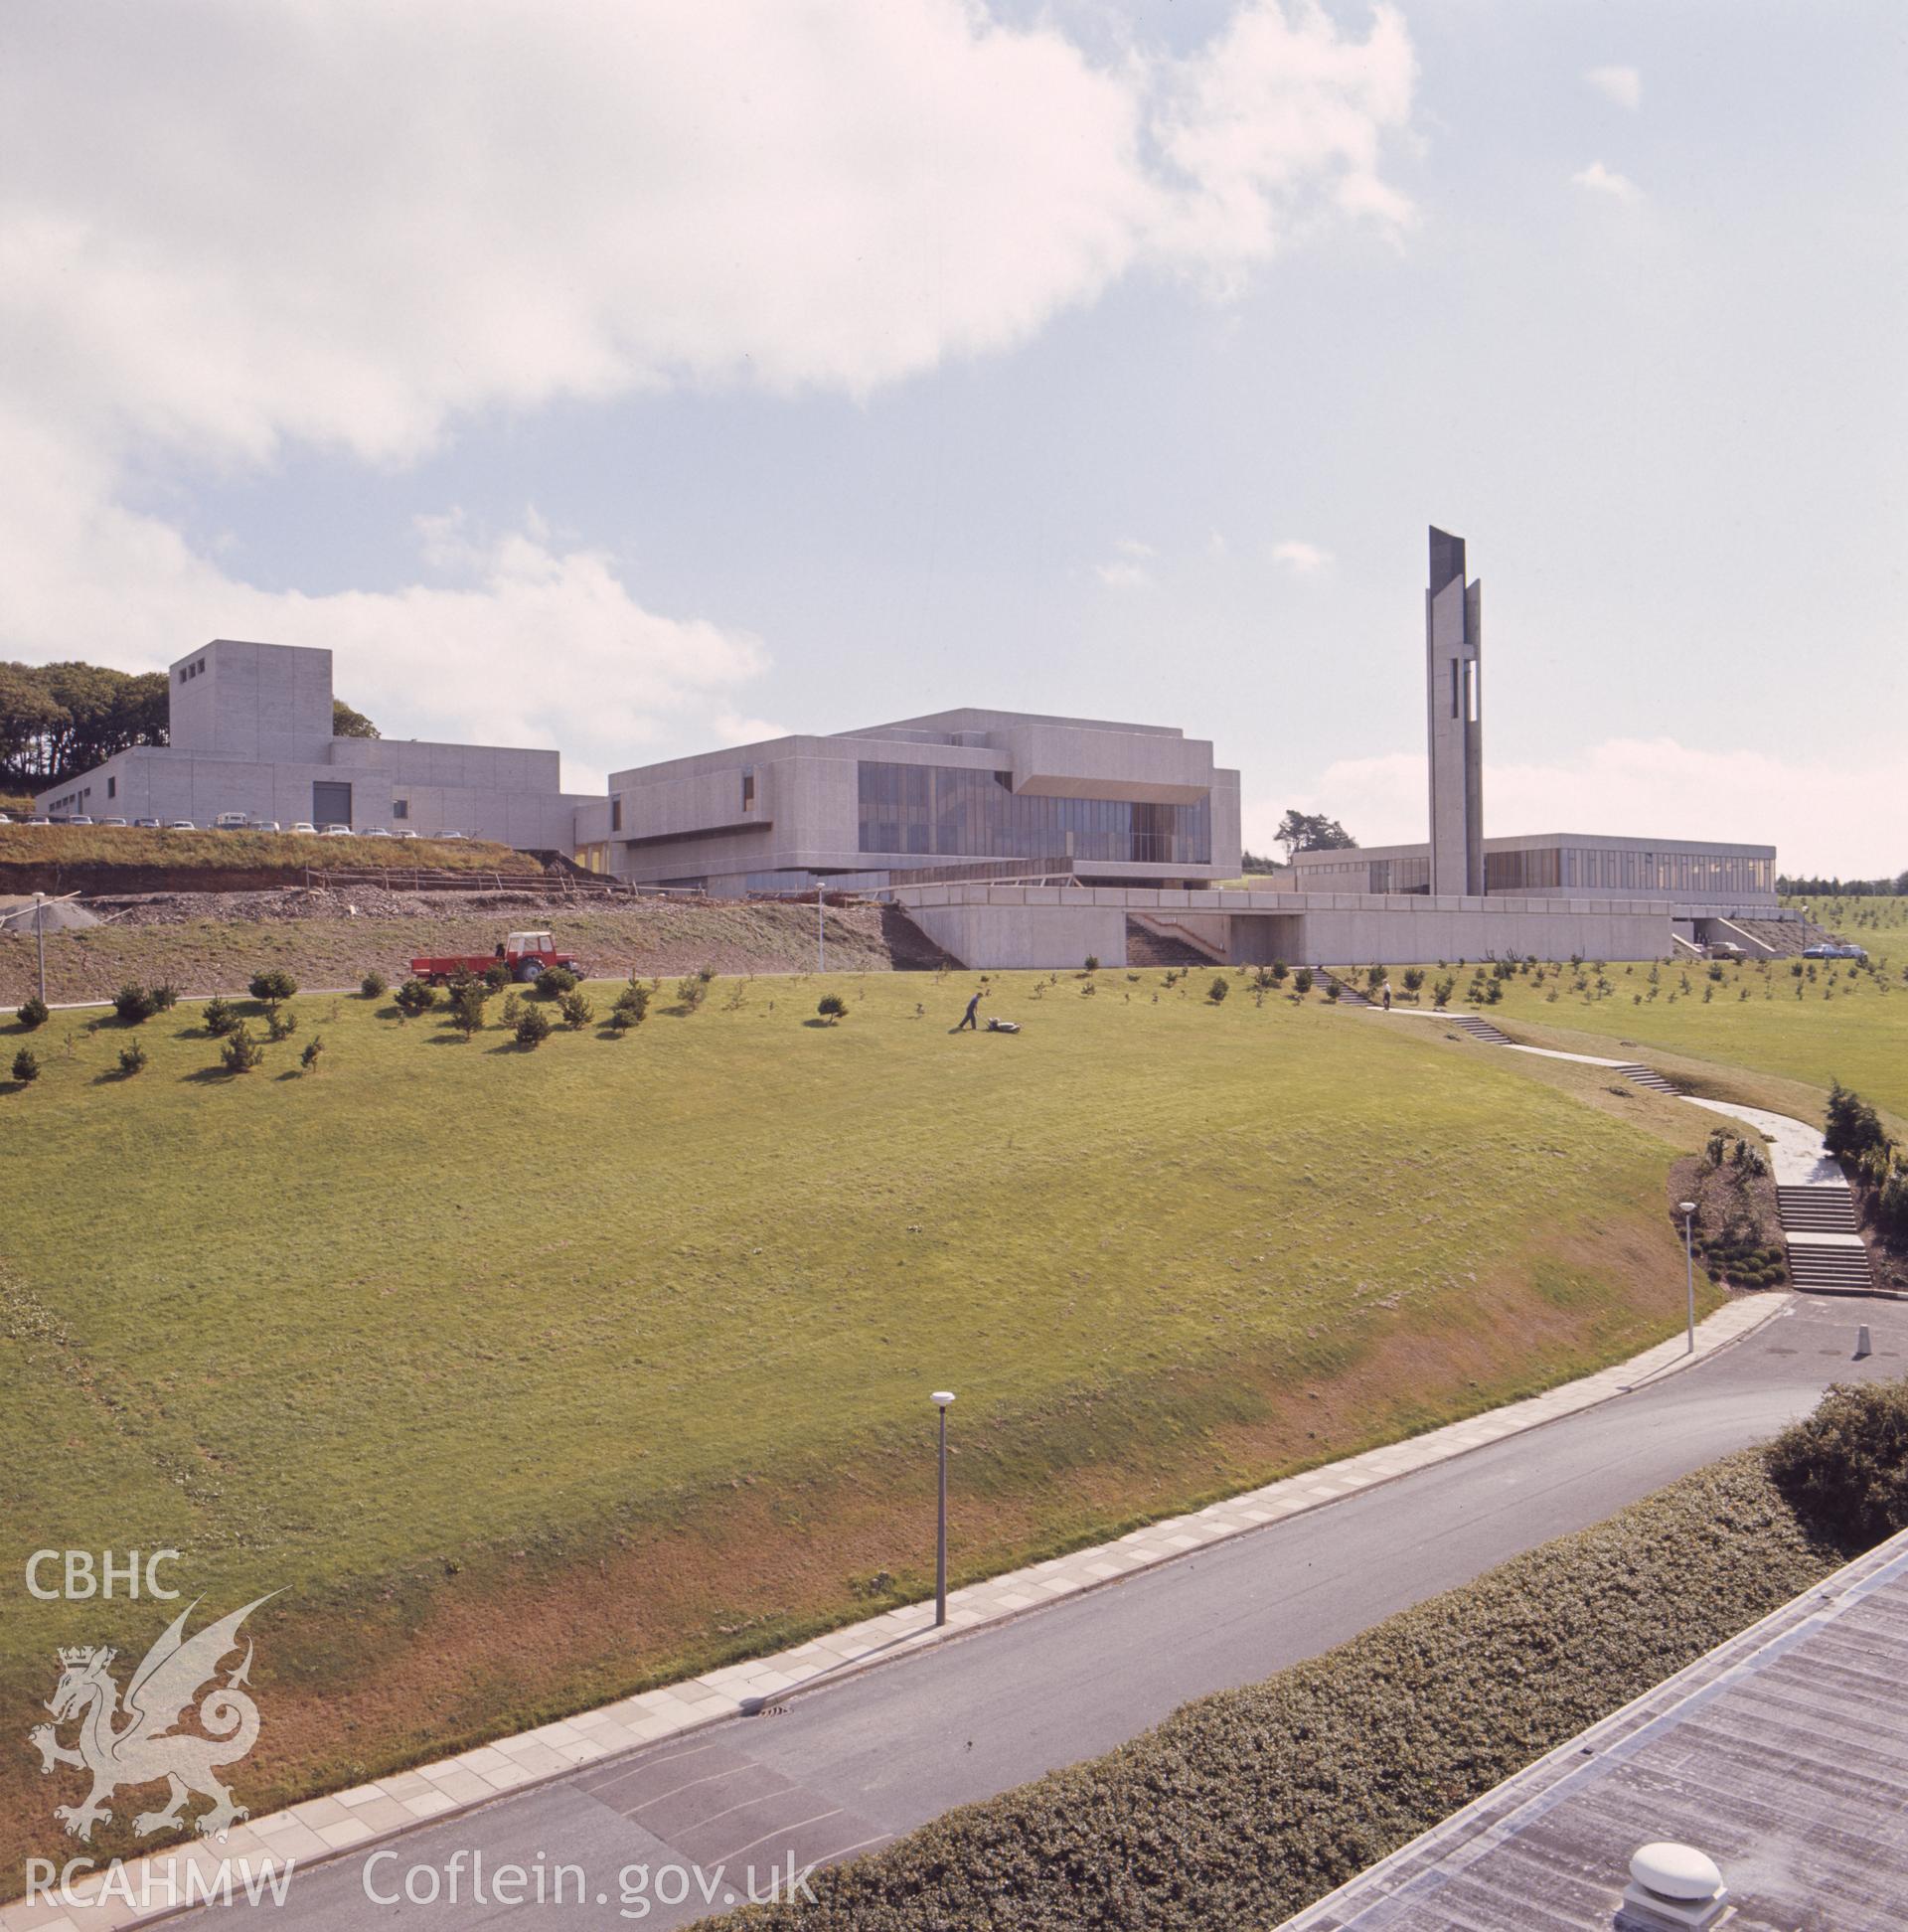 1 colour transparency showing view of Aberystwyth Arts Centre with bell tower; collated by the former Central Office of Information.